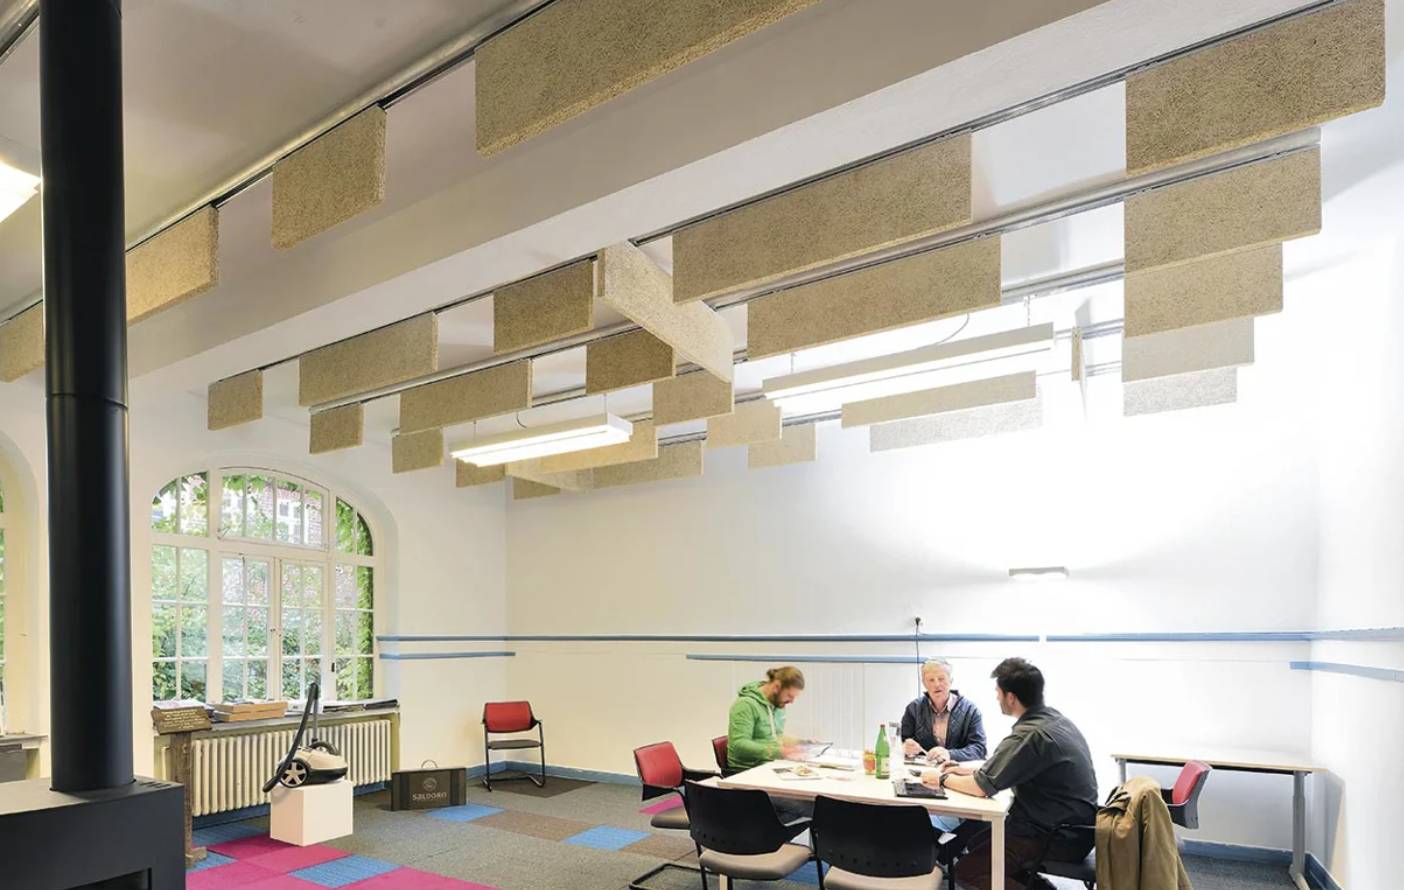 Troldtekt acoustic clouds and baffles - Wood Wool Panelling